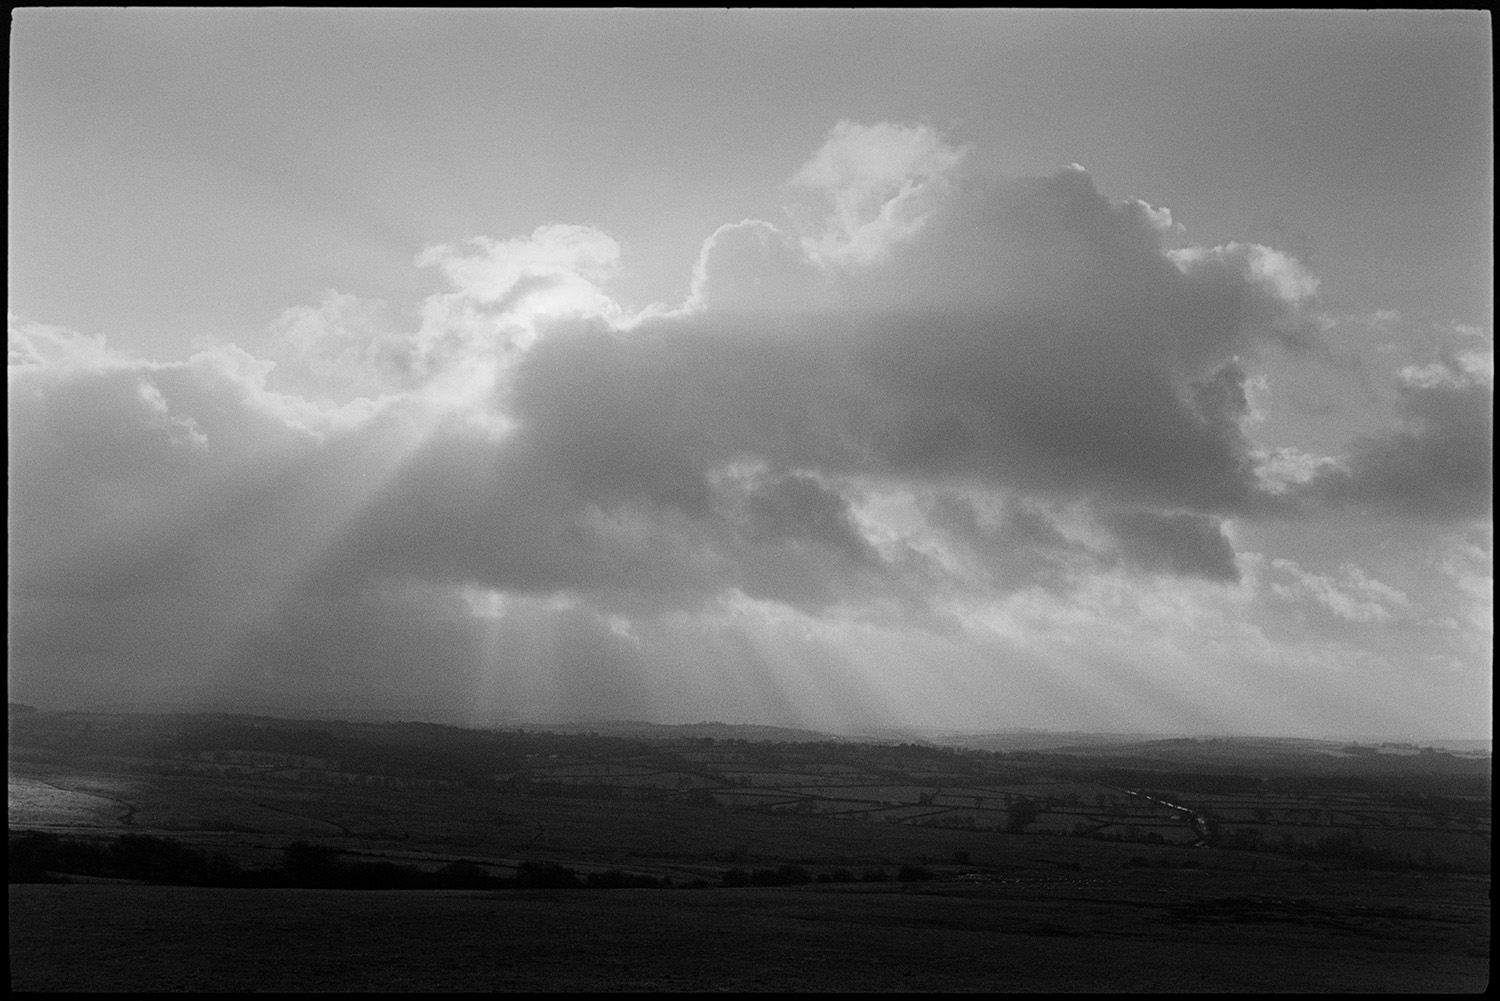 Cloudy views across moor couple walking with pram. 
[Shafts of sunlight shining through clouds onto a landscape of fields and trees on Hatherleigh Moor.]